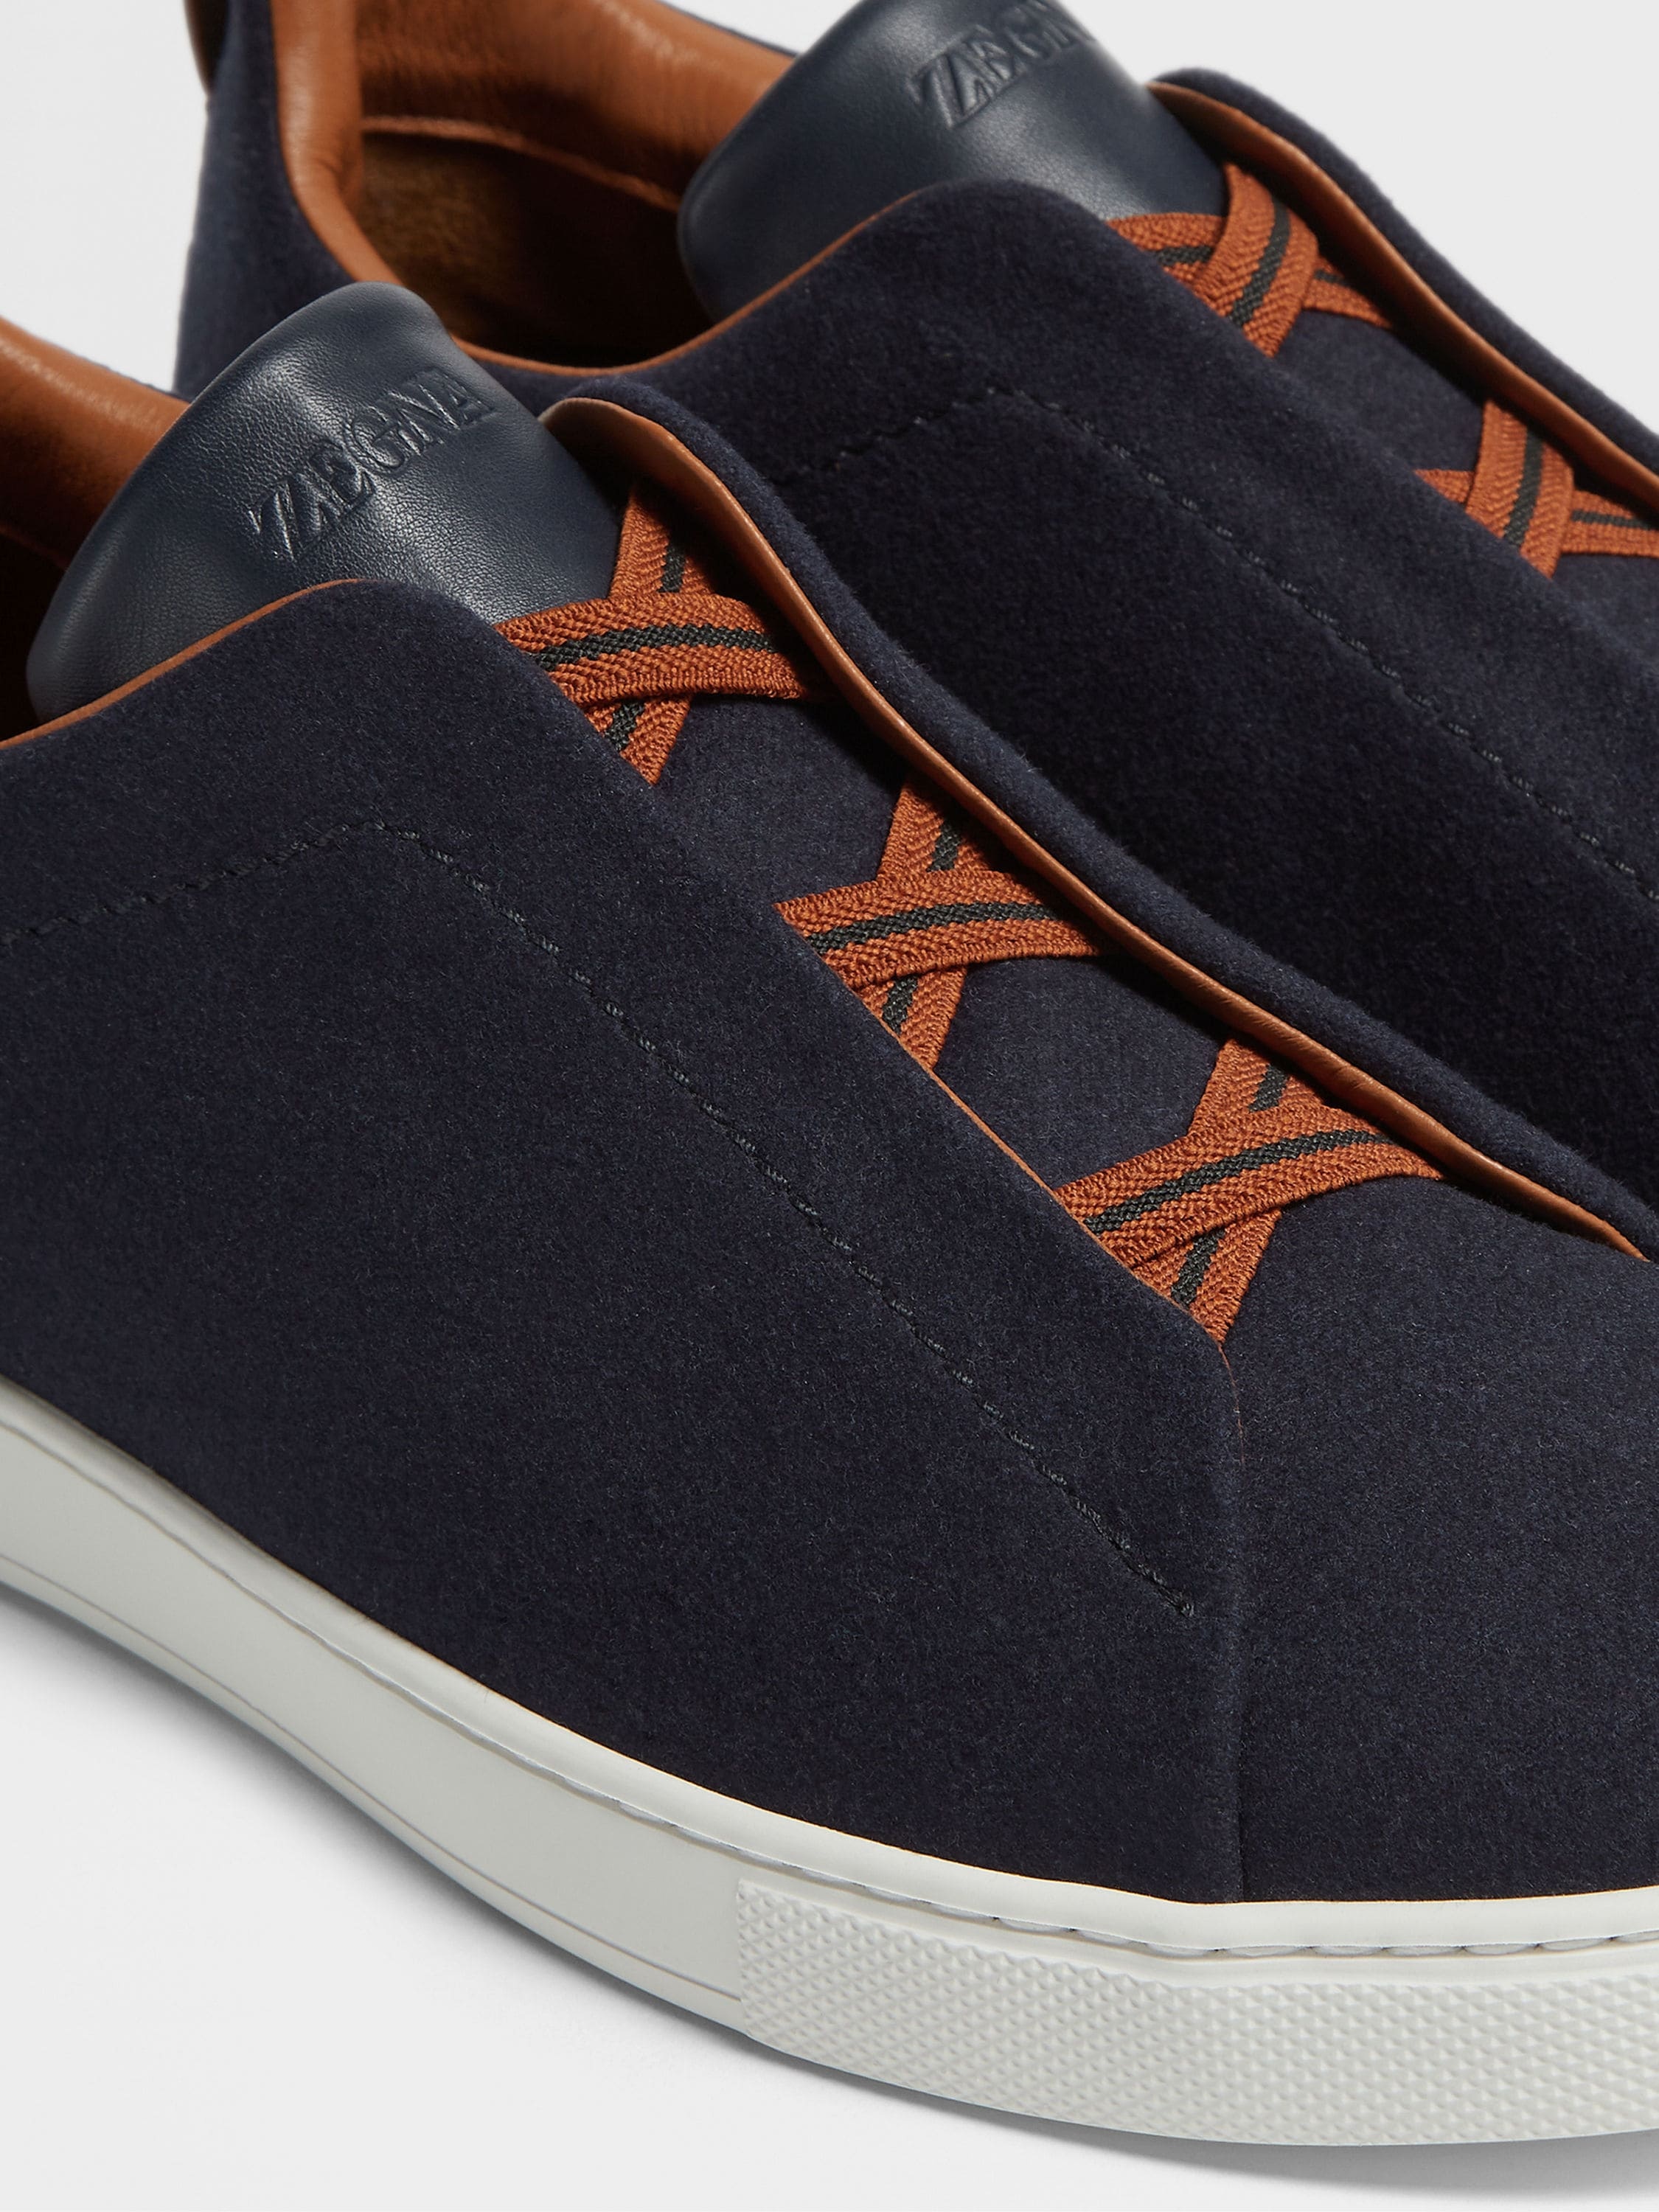 NAVY BLUE #USETHEEXISTING™ WOOL TRIPLE STITCH™ SNEAKERS - 2